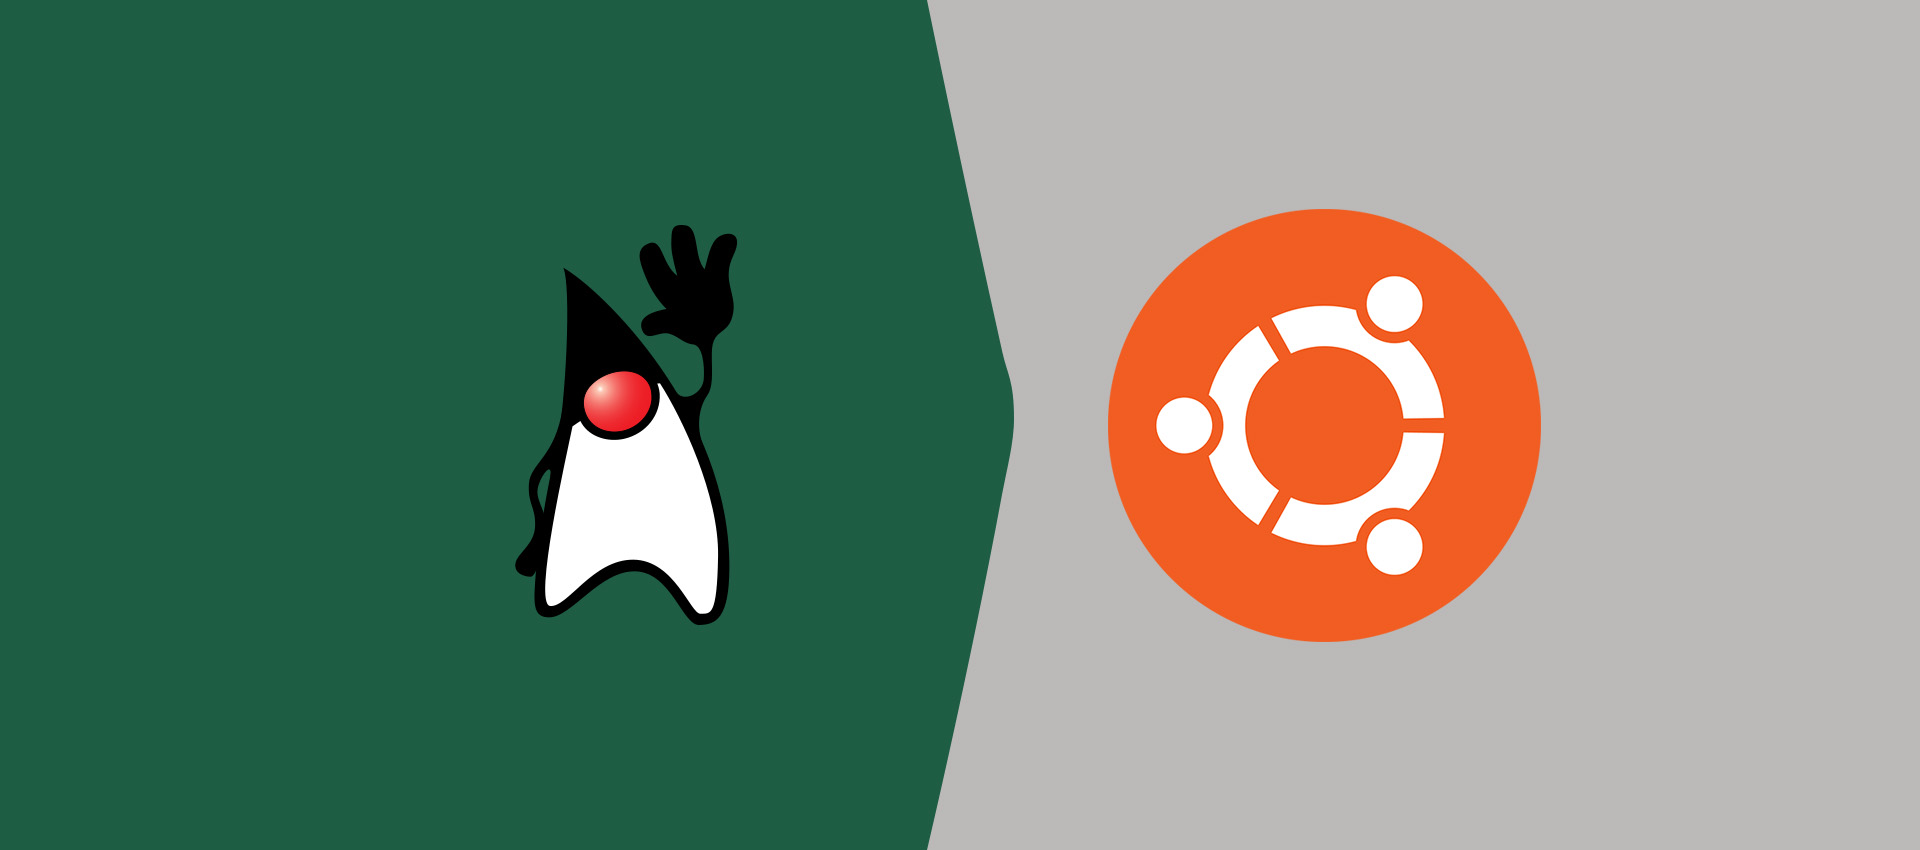 How To Install OpenJDK 16 On Ubuntu 20.04 LTS